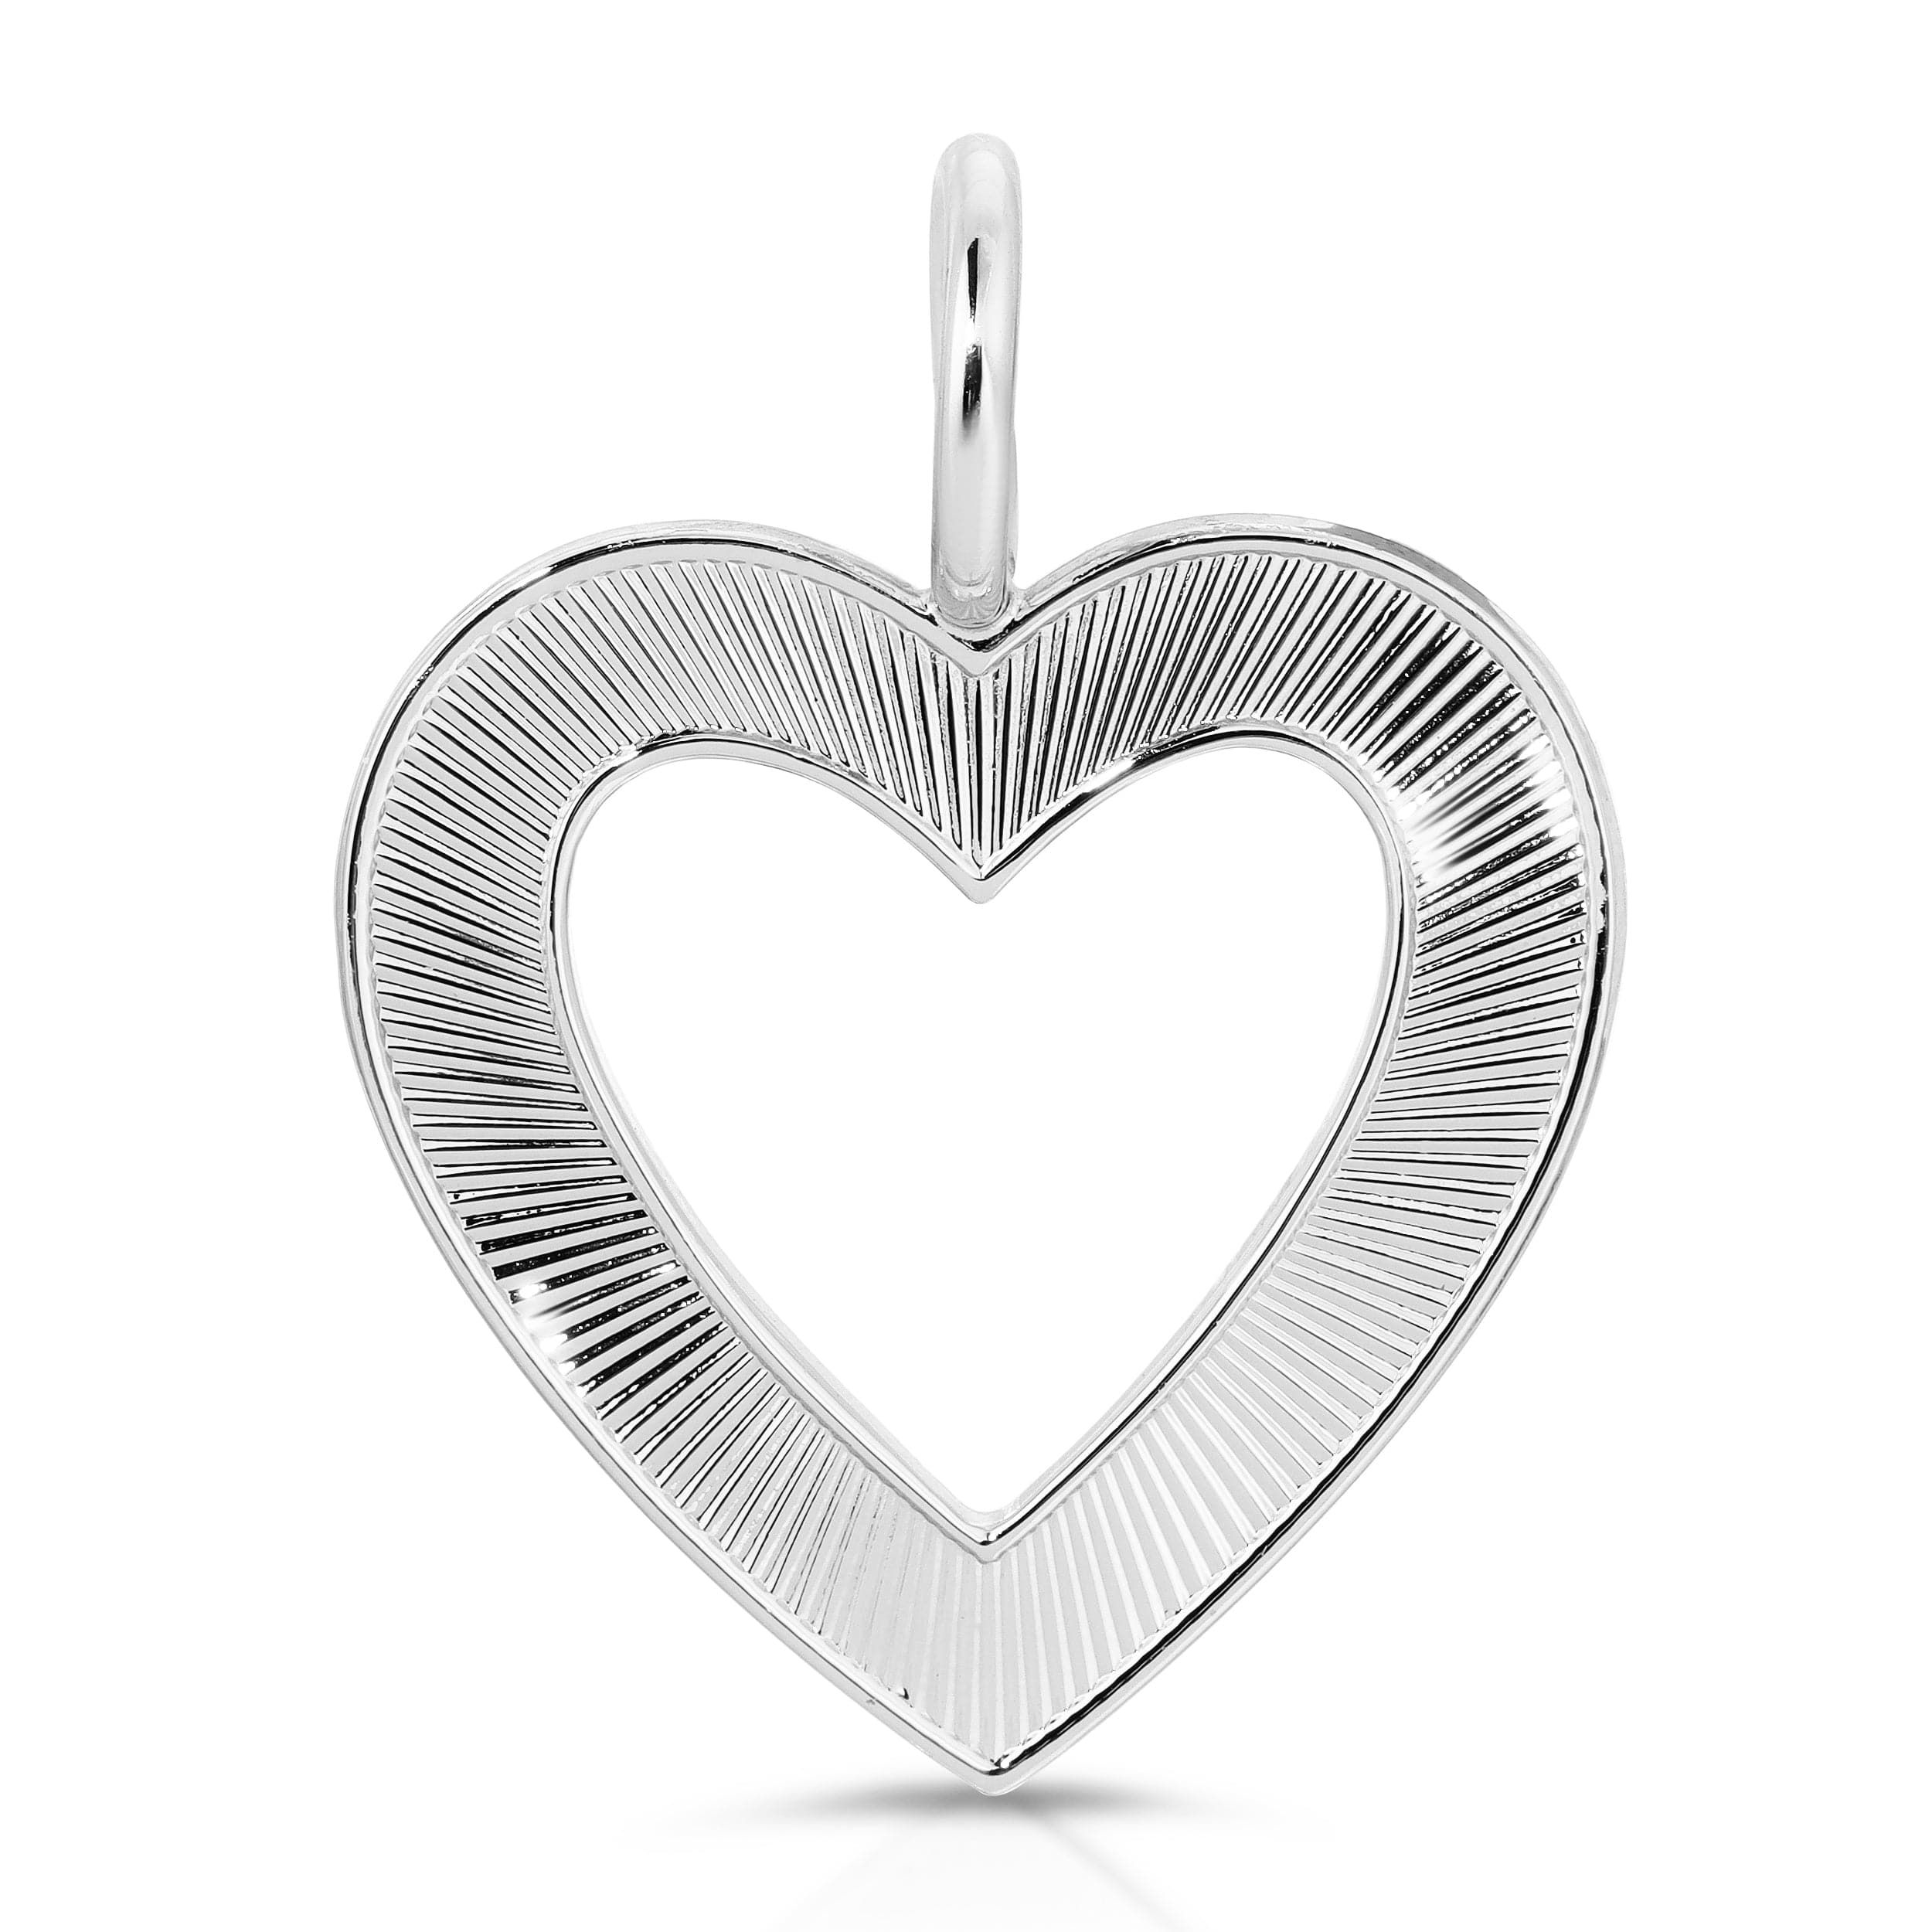 a heart shaped pendant on a white background